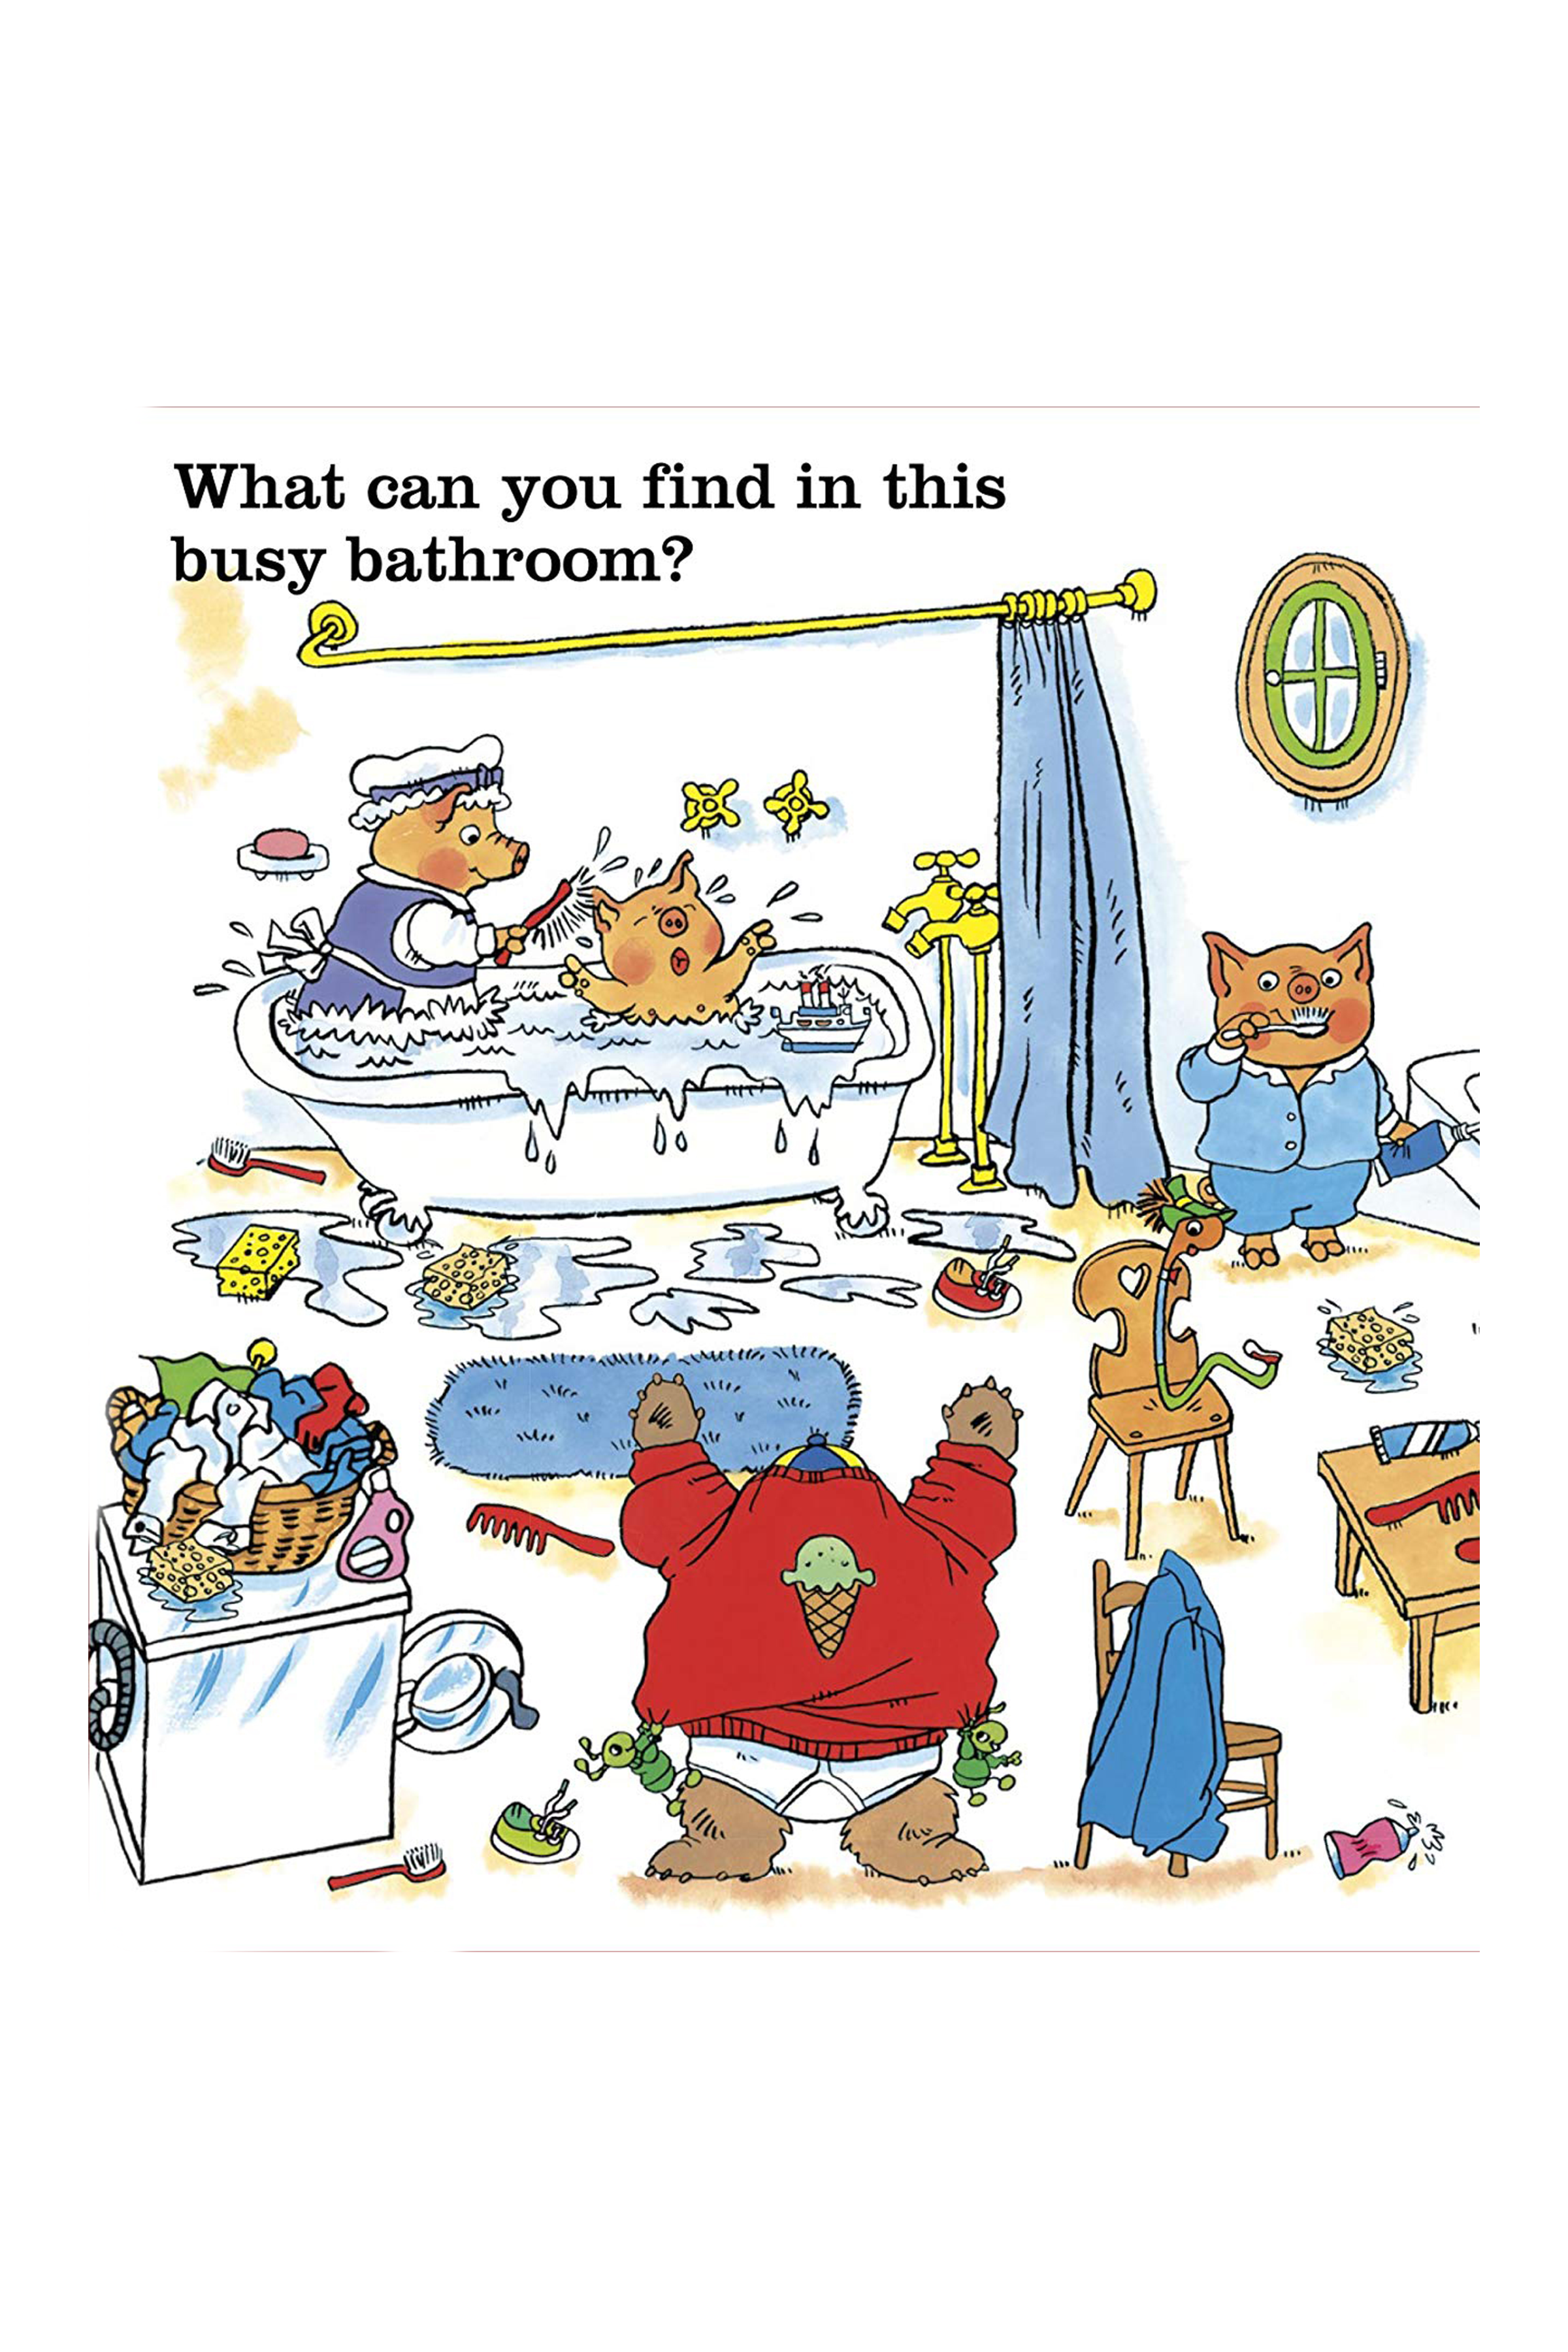 RICHARD SCARRY'S SEEK AND FIND